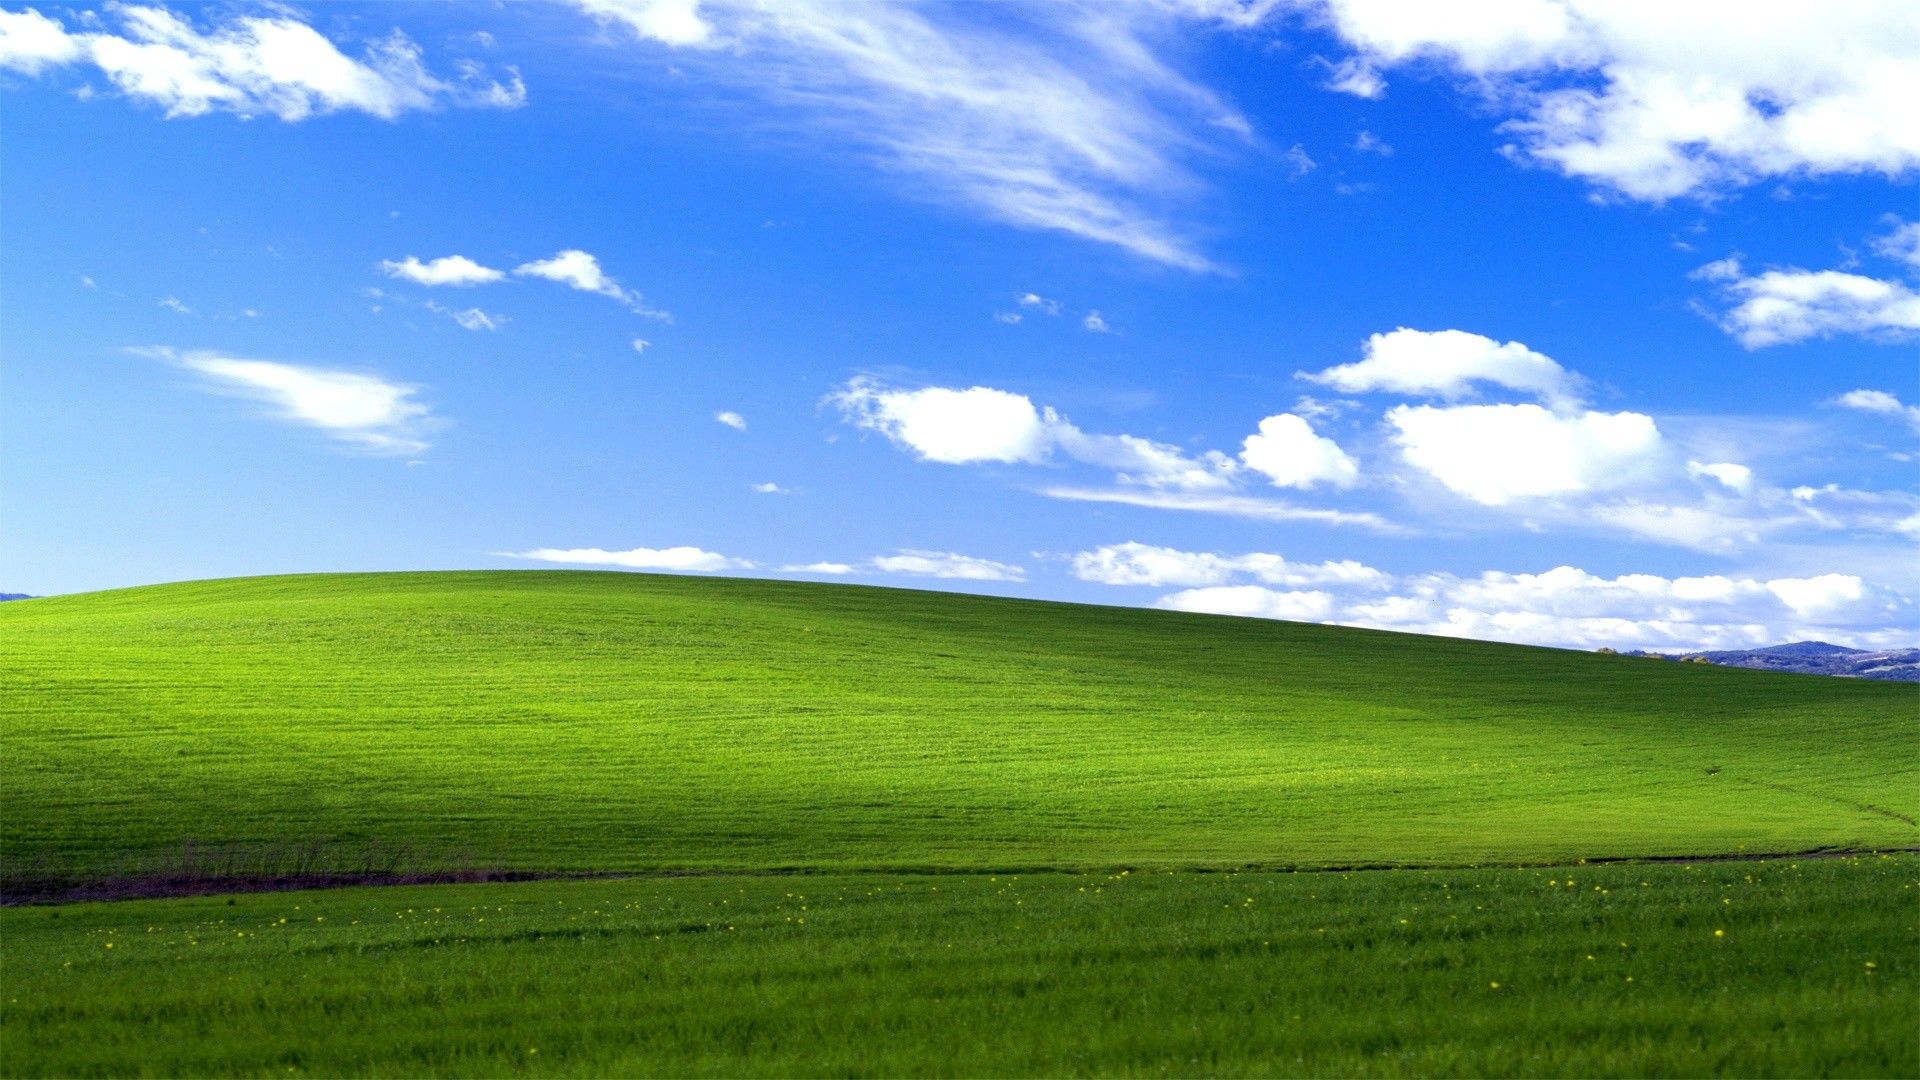 Old Windows Wallpaper Free Old Windows Background